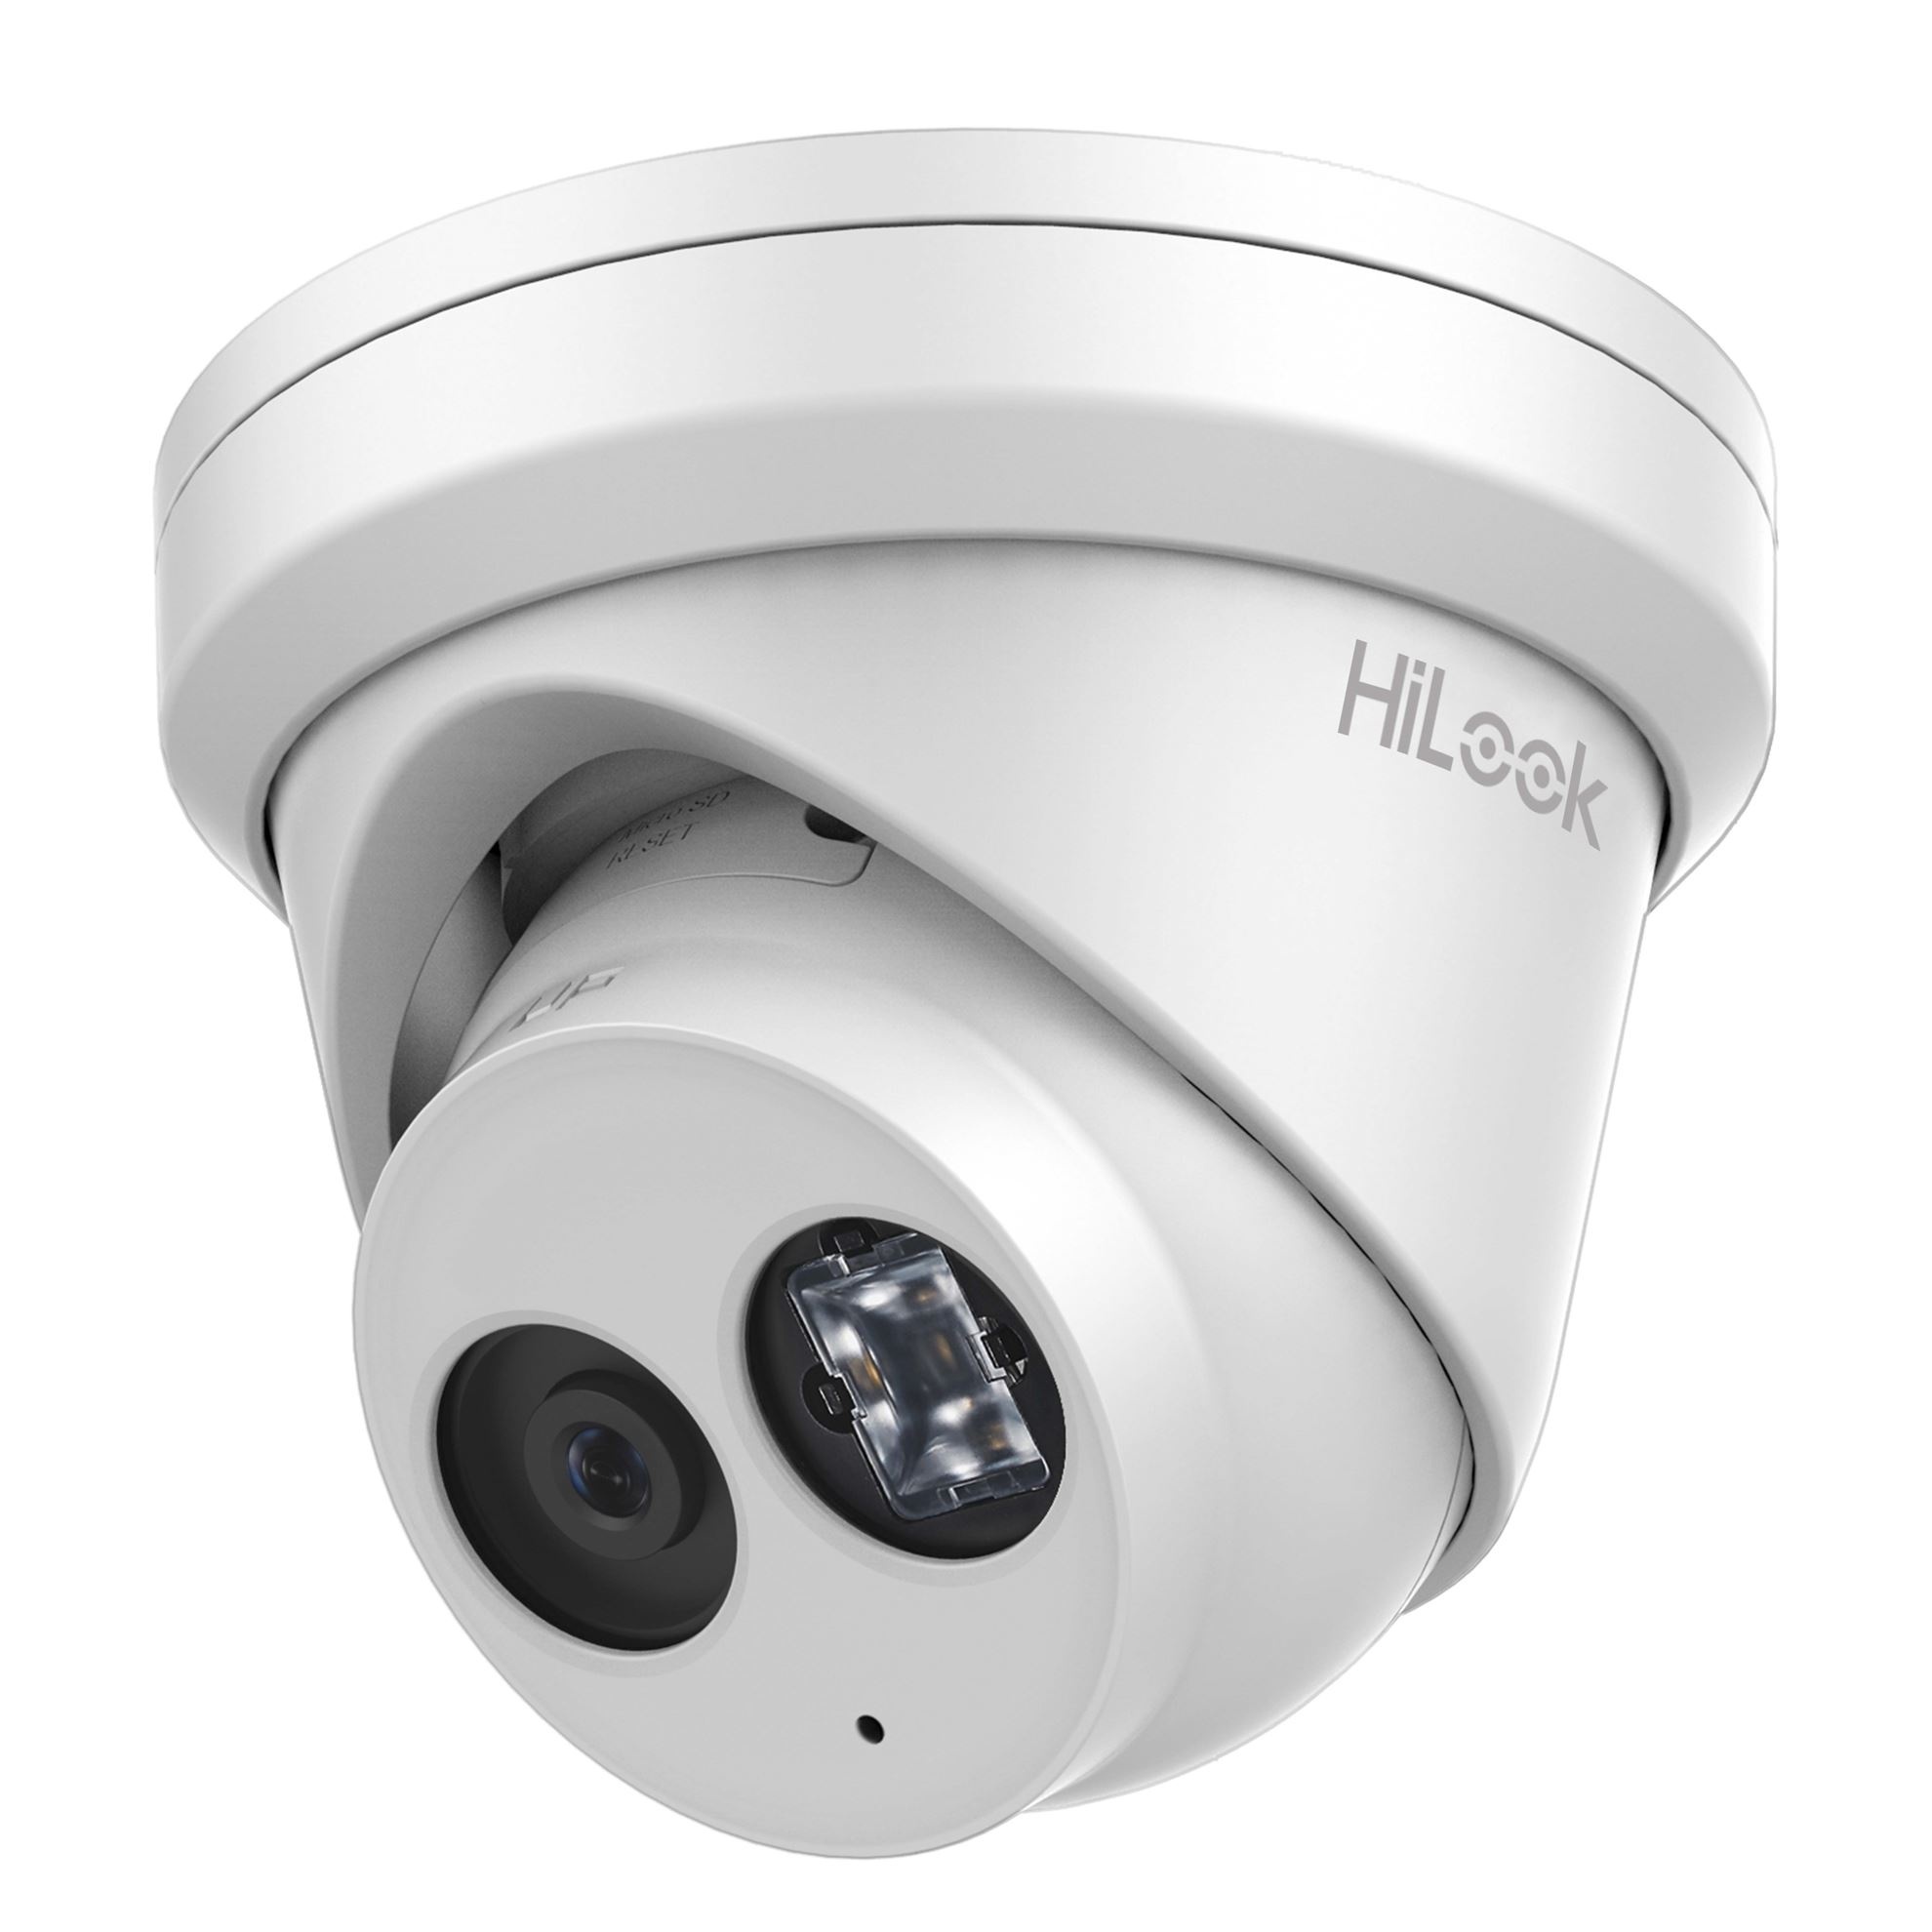 HILOOK 8MP IP POE Turret Camera with 2.8mm Fixed Lens